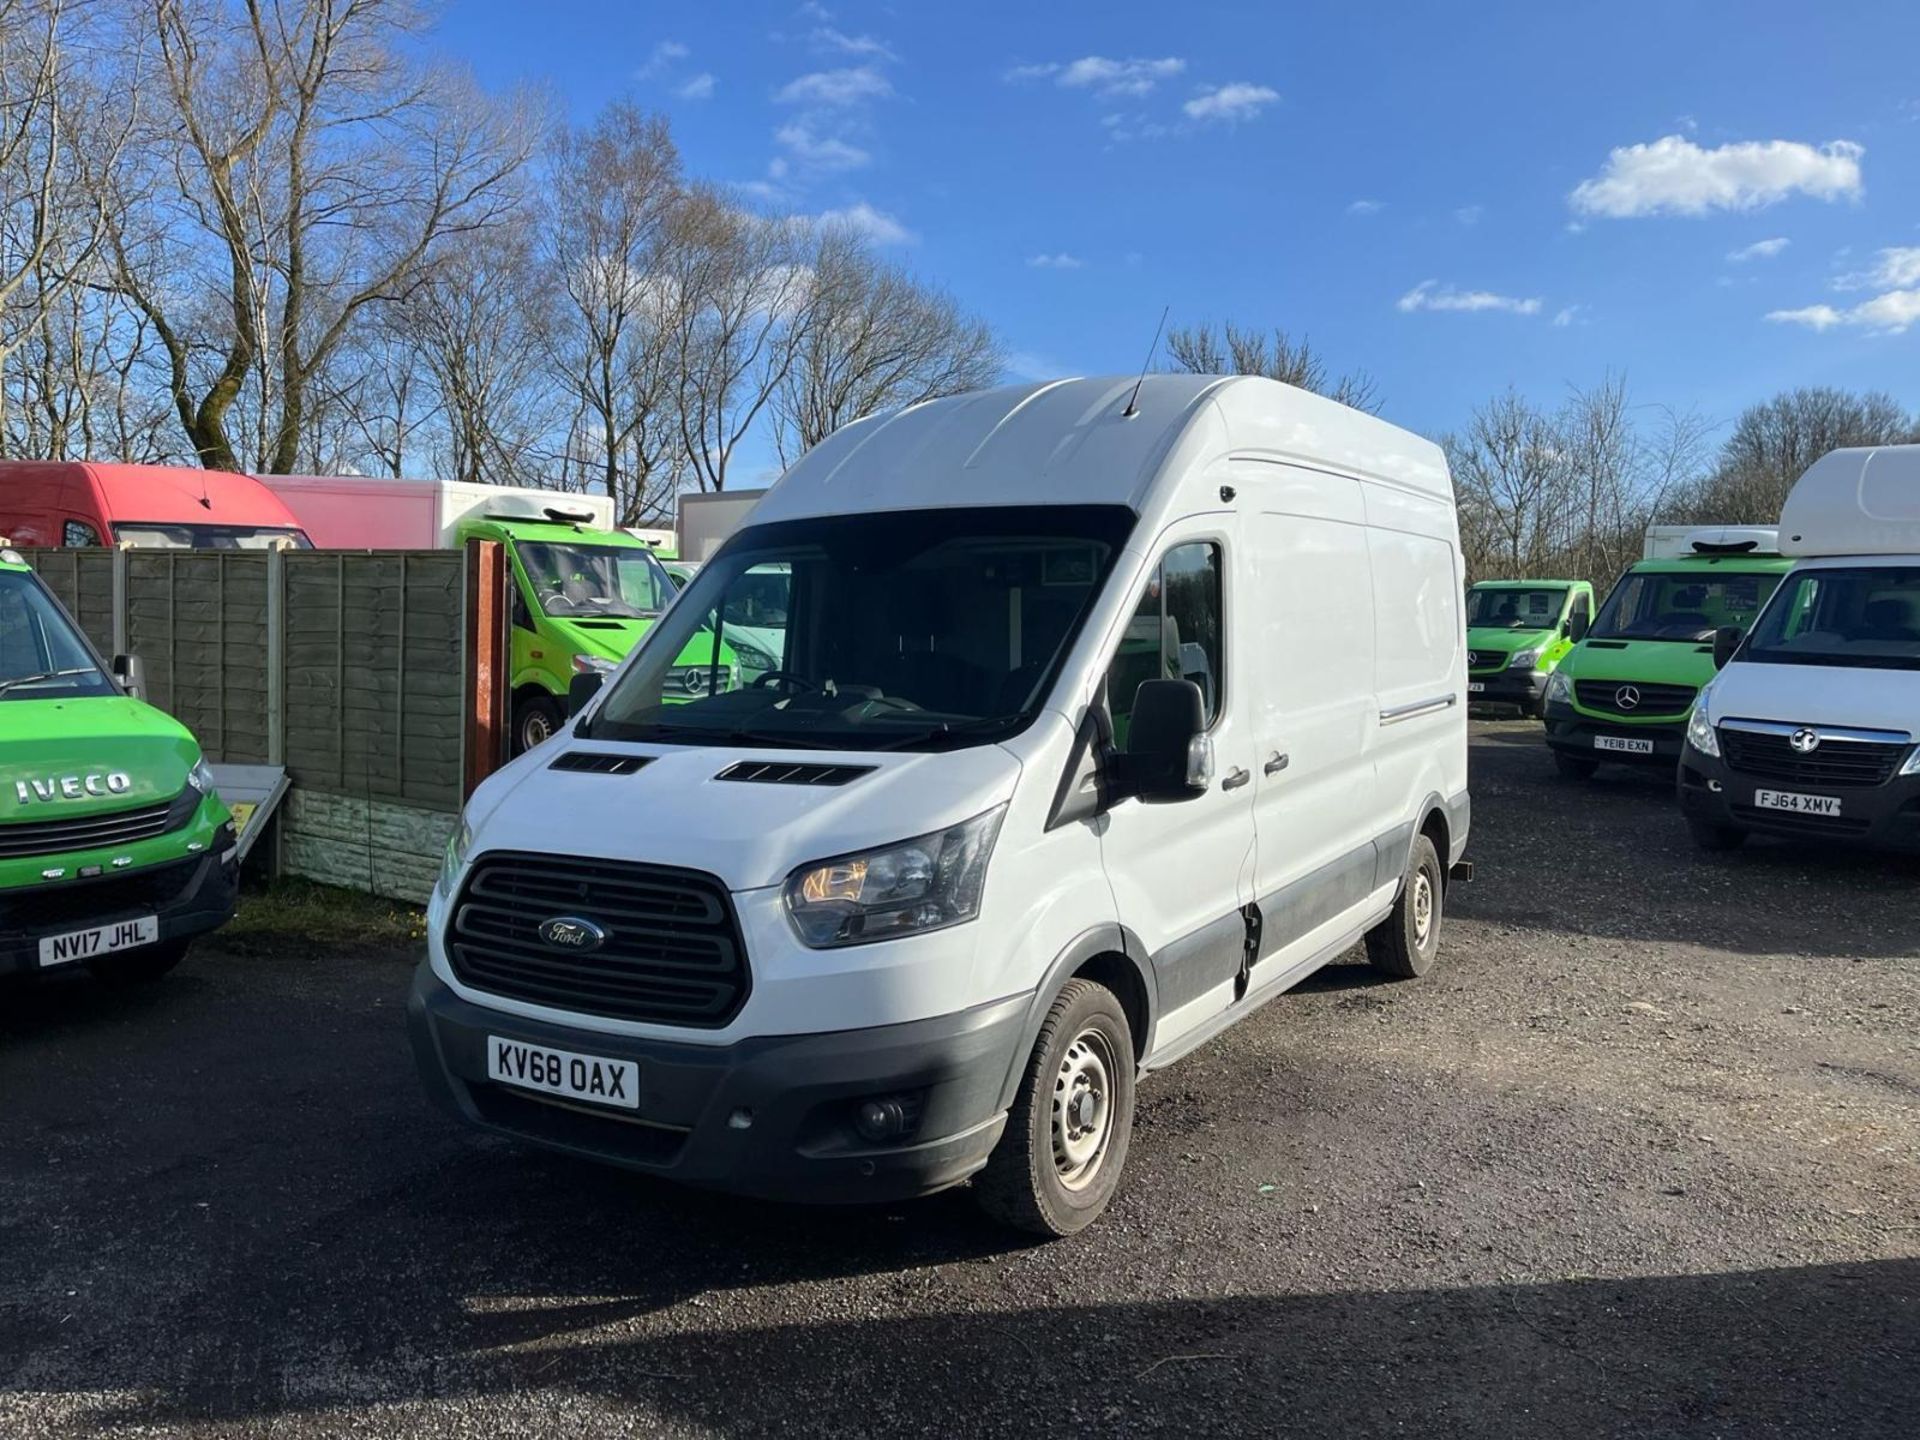 2018 FORD TRANSIT 2.0 TDCI 130PS L3 H3 - RELIABLE, SPACIOUS, AND READY FOR YOUR BUSINESS NEEDS